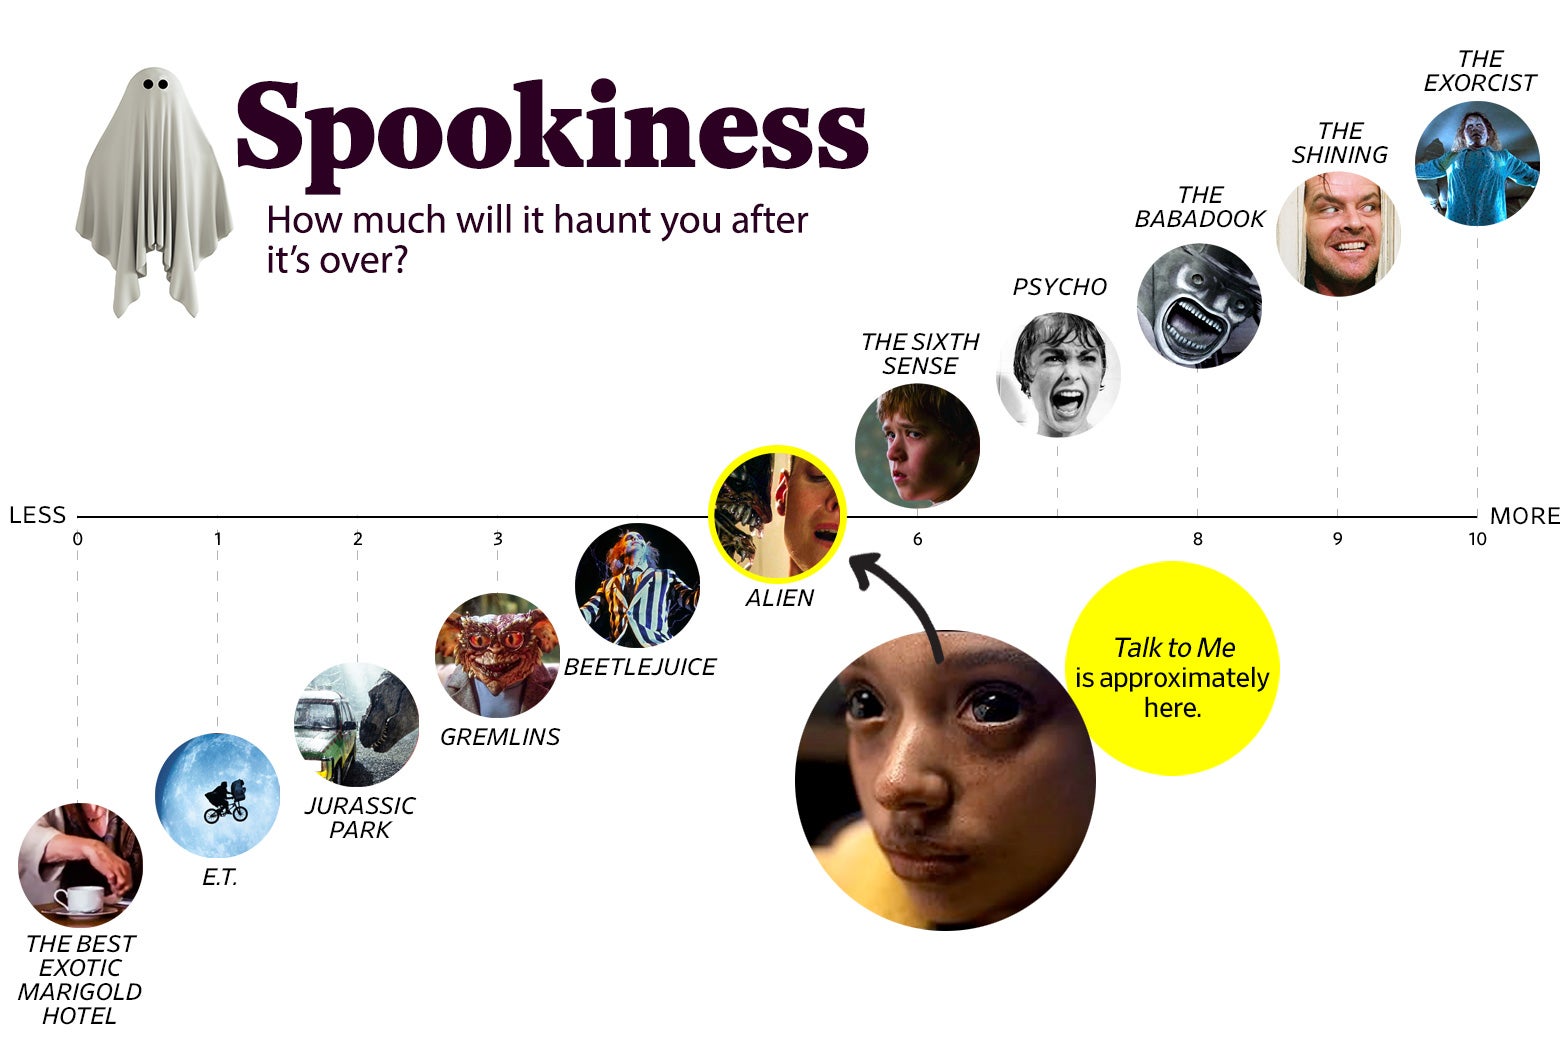 A chart titled “Spookiness: How much will it haunt you after the movie is over?” shows that Talk to Me ranks a 5 in spookiness, roughly the same as Alien. The scale ranges from The Best Exotic Marigold Hotel (0) to The Exorcist (10).